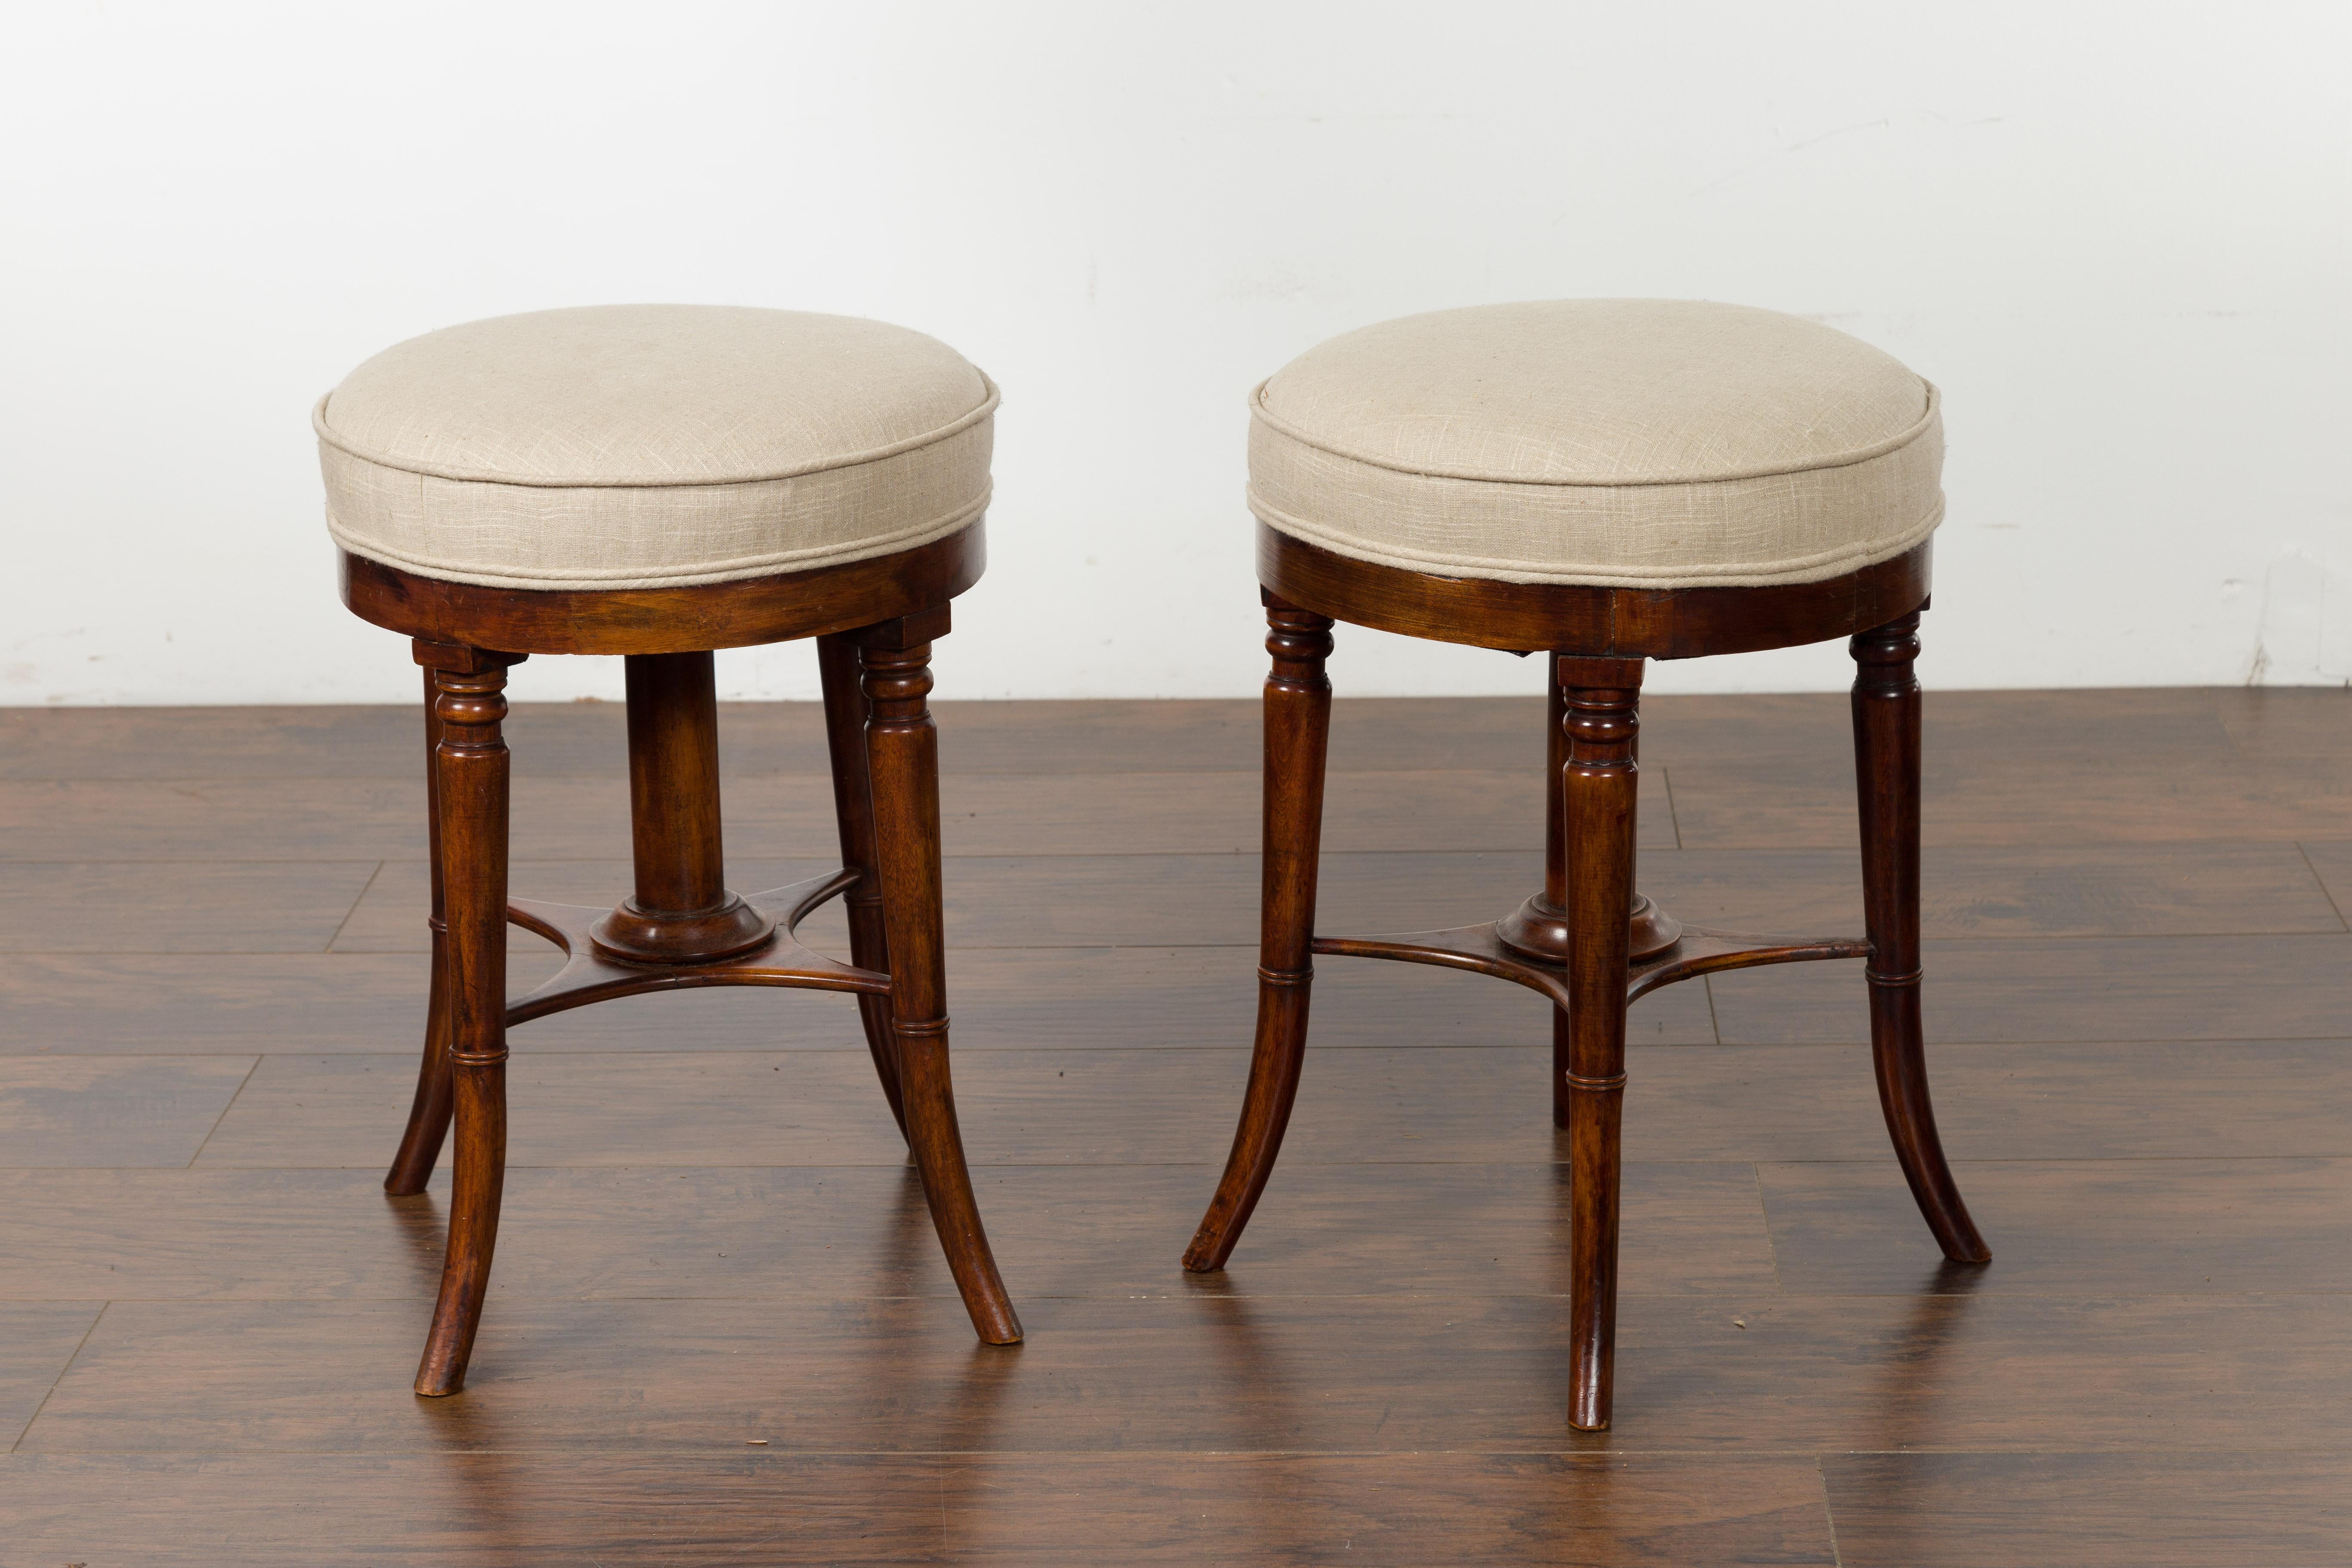 Pair of English 1920s Mahogany Stools with Turned Legs and New Upholstery For Sale 9